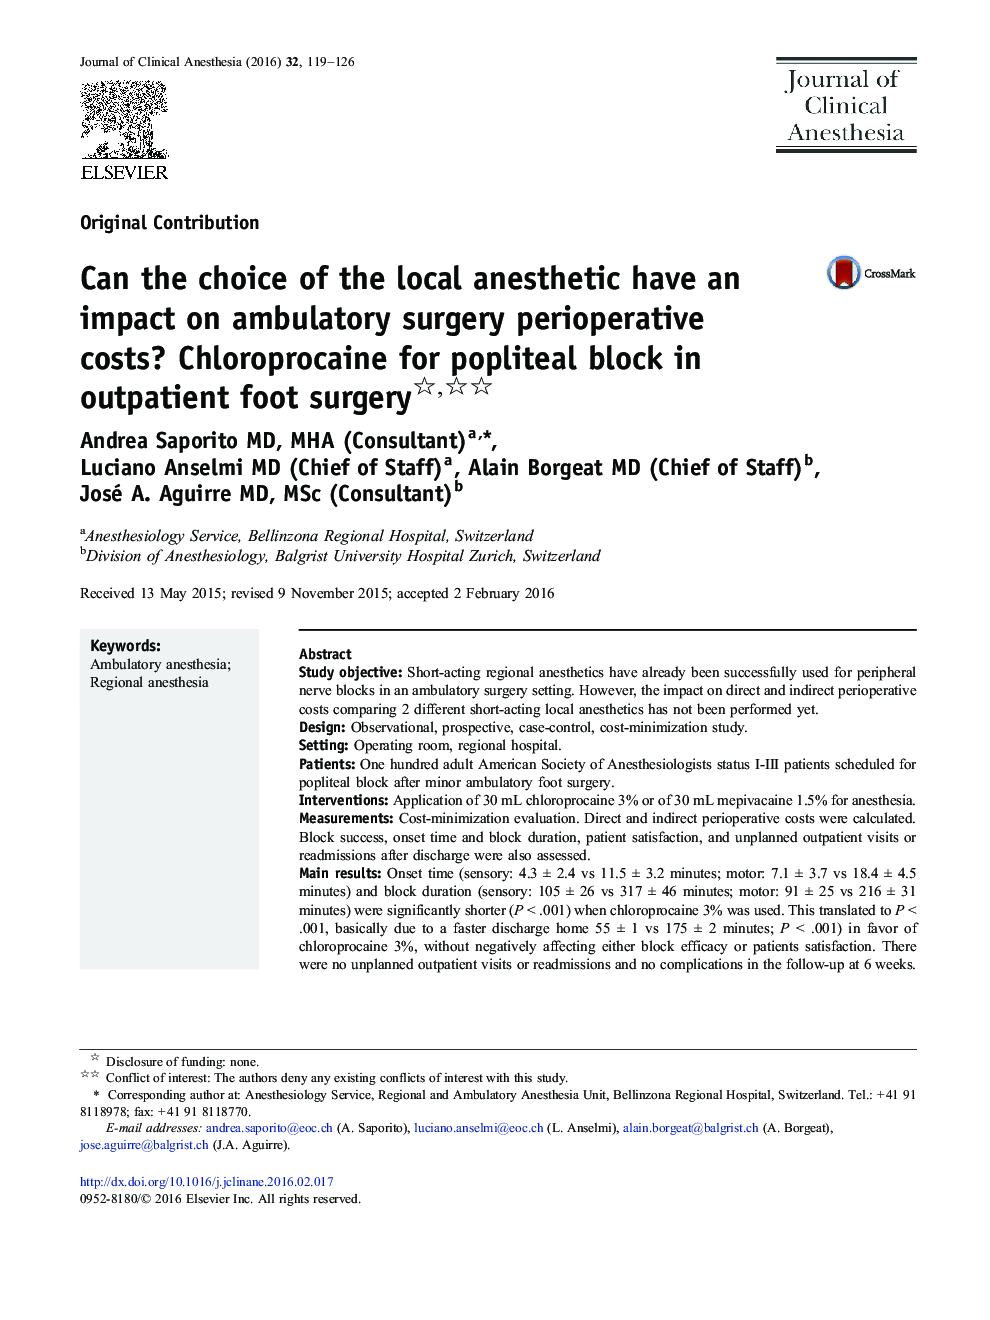 Original ContributionCan the choice of the local anesthetic have an impact on ambulatory surgery perioperative costs? Chloroprocaine for popliteal block in outpatient foot surgery